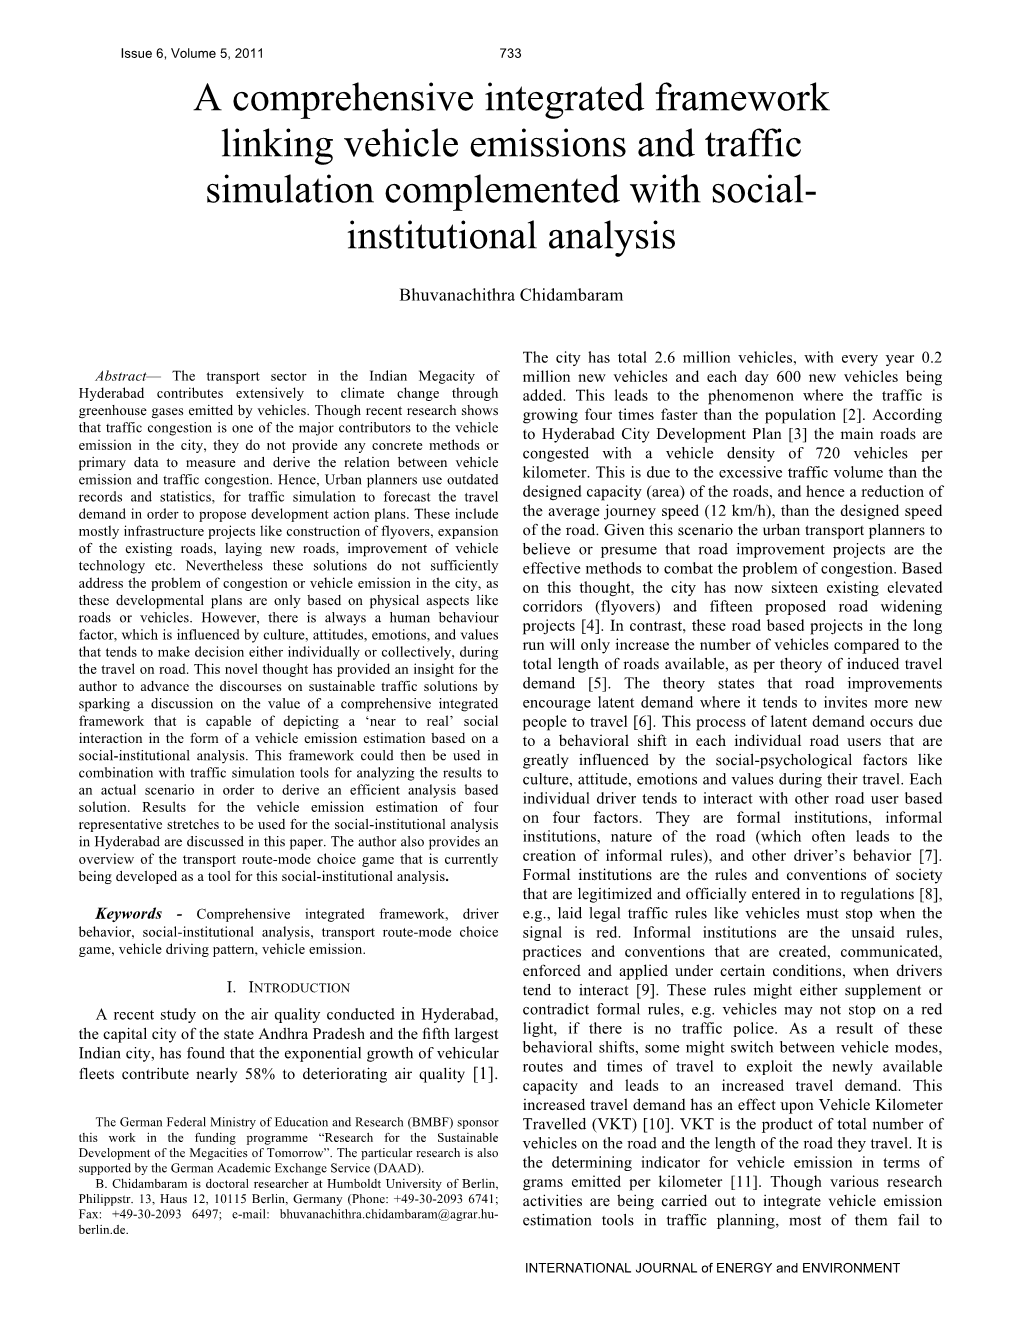 A Comprehensive Integrated Framework Linking Vehicle Emissions and Traffic Simulation Complemented with Social- Institutional Analysis